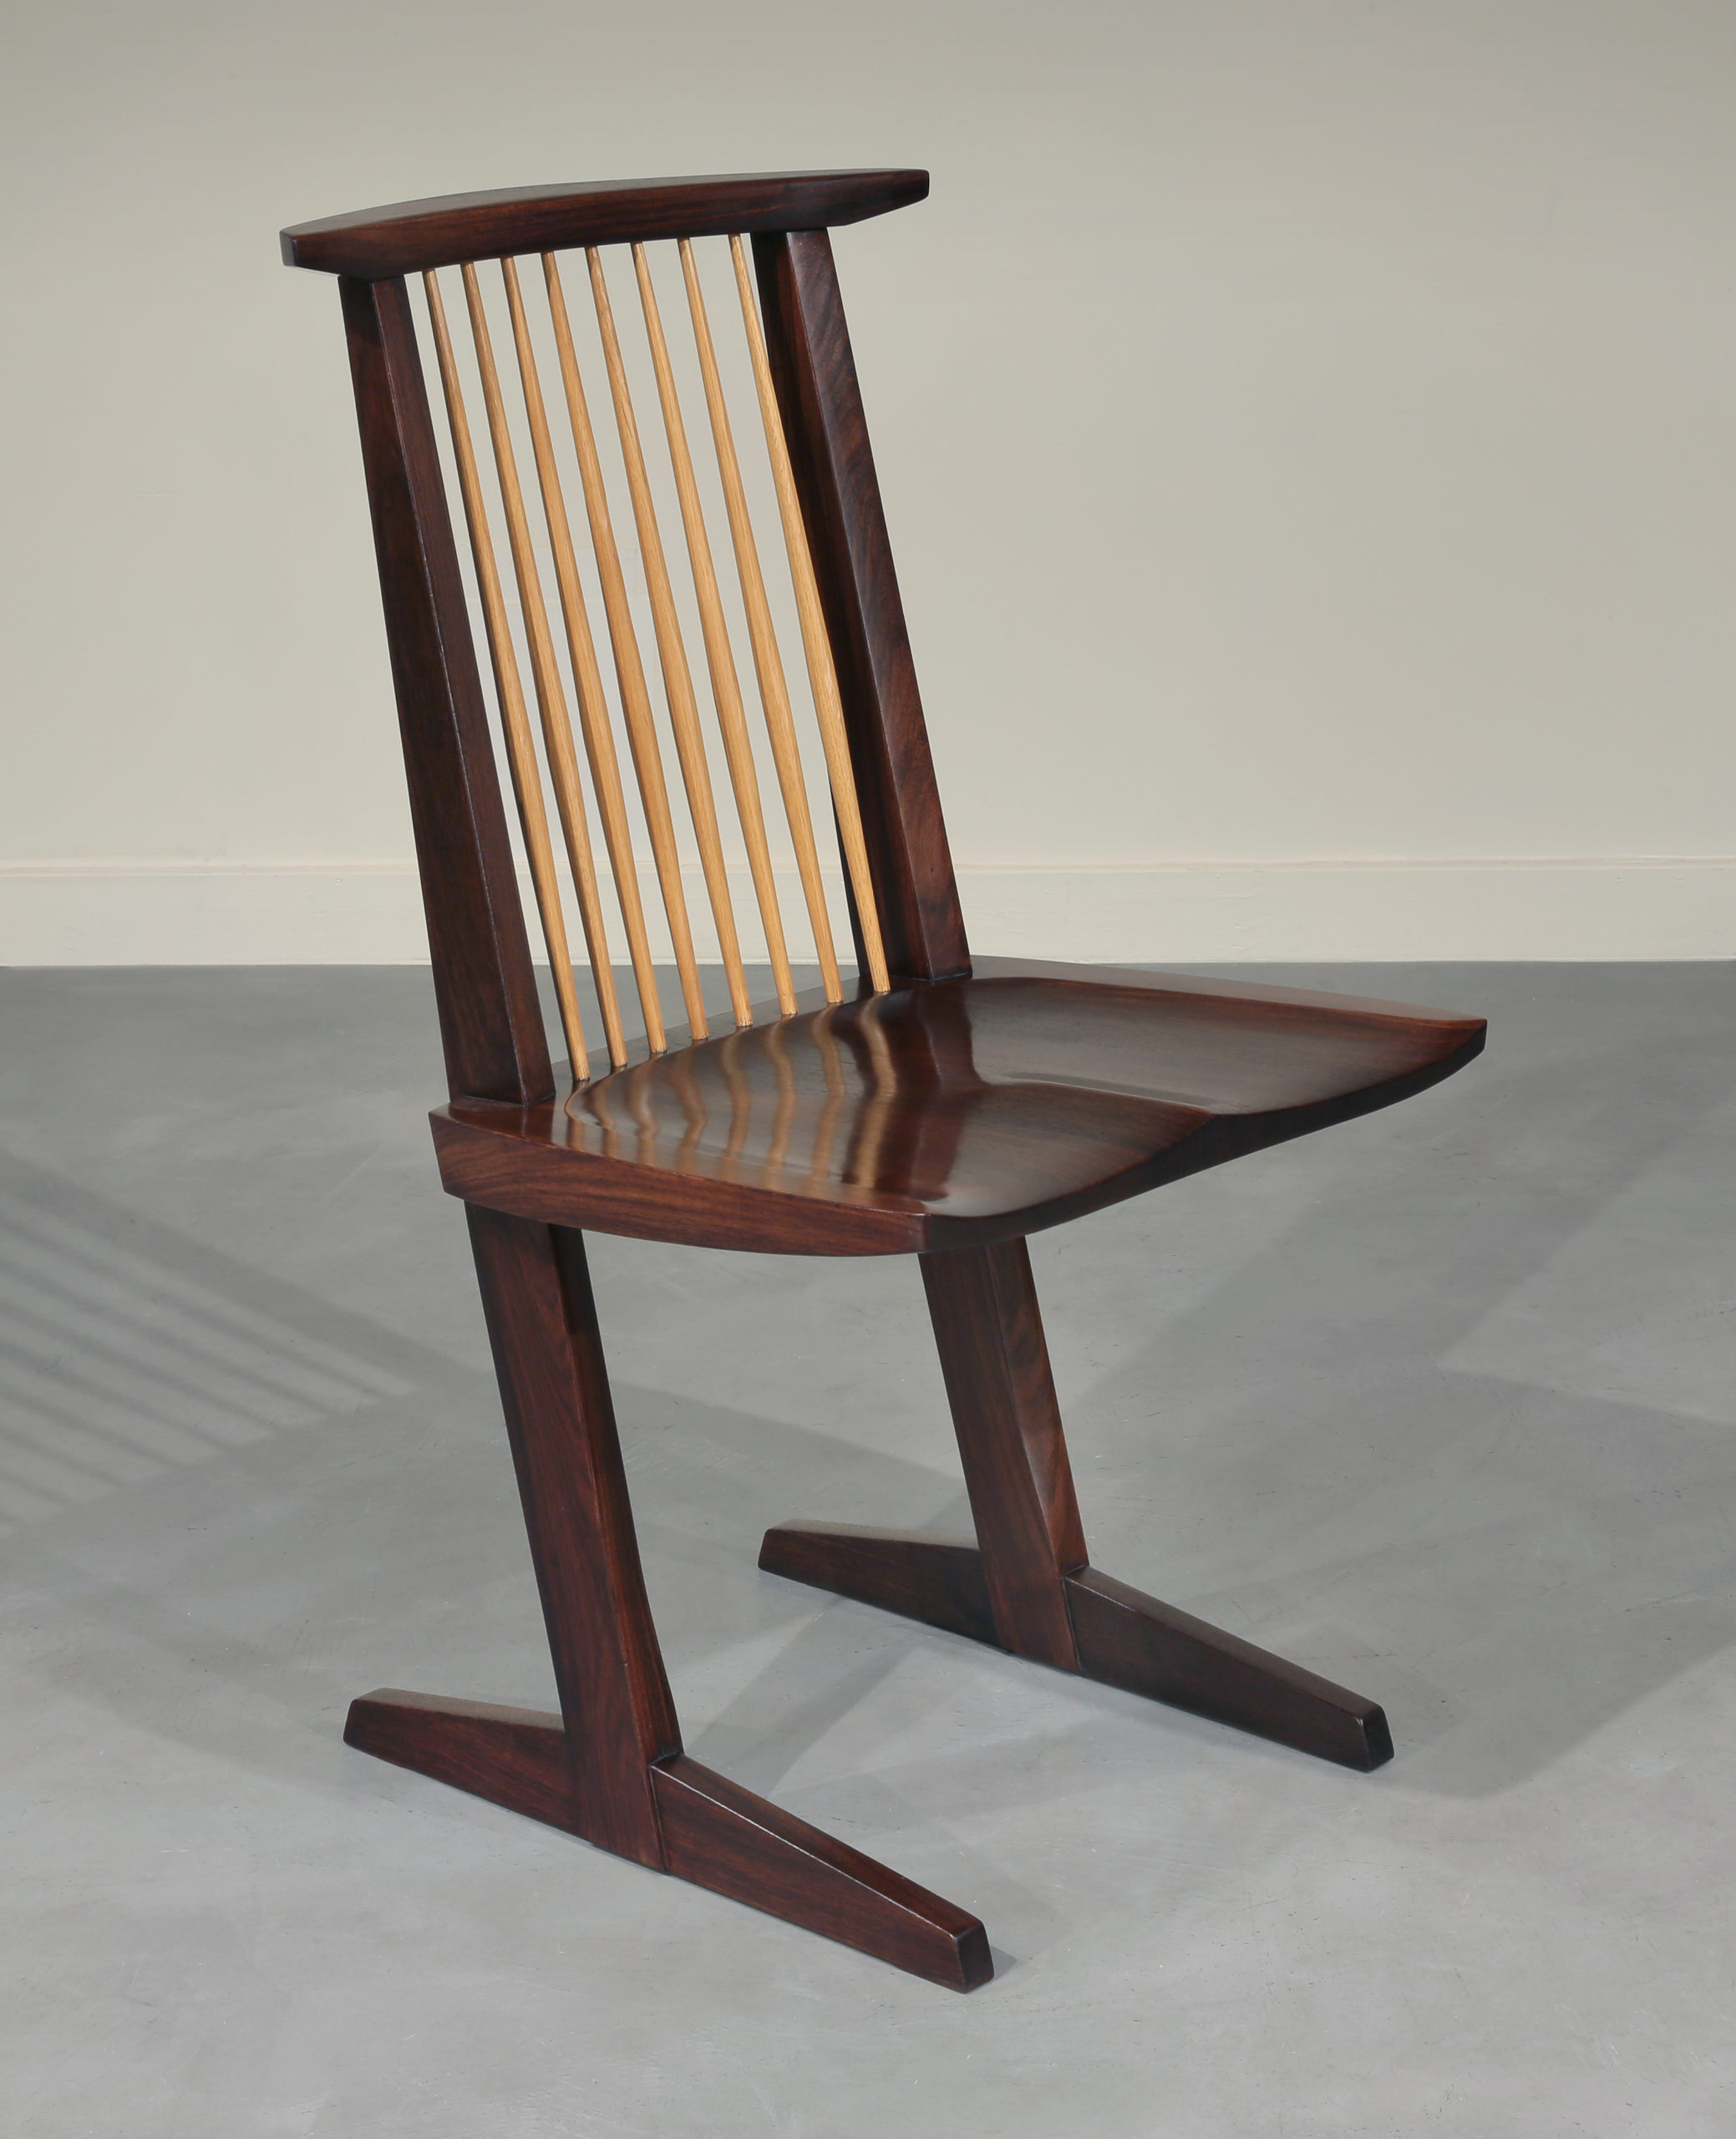 George Nakashima Rosewood Conoid Chair, available at Moderne Gallery